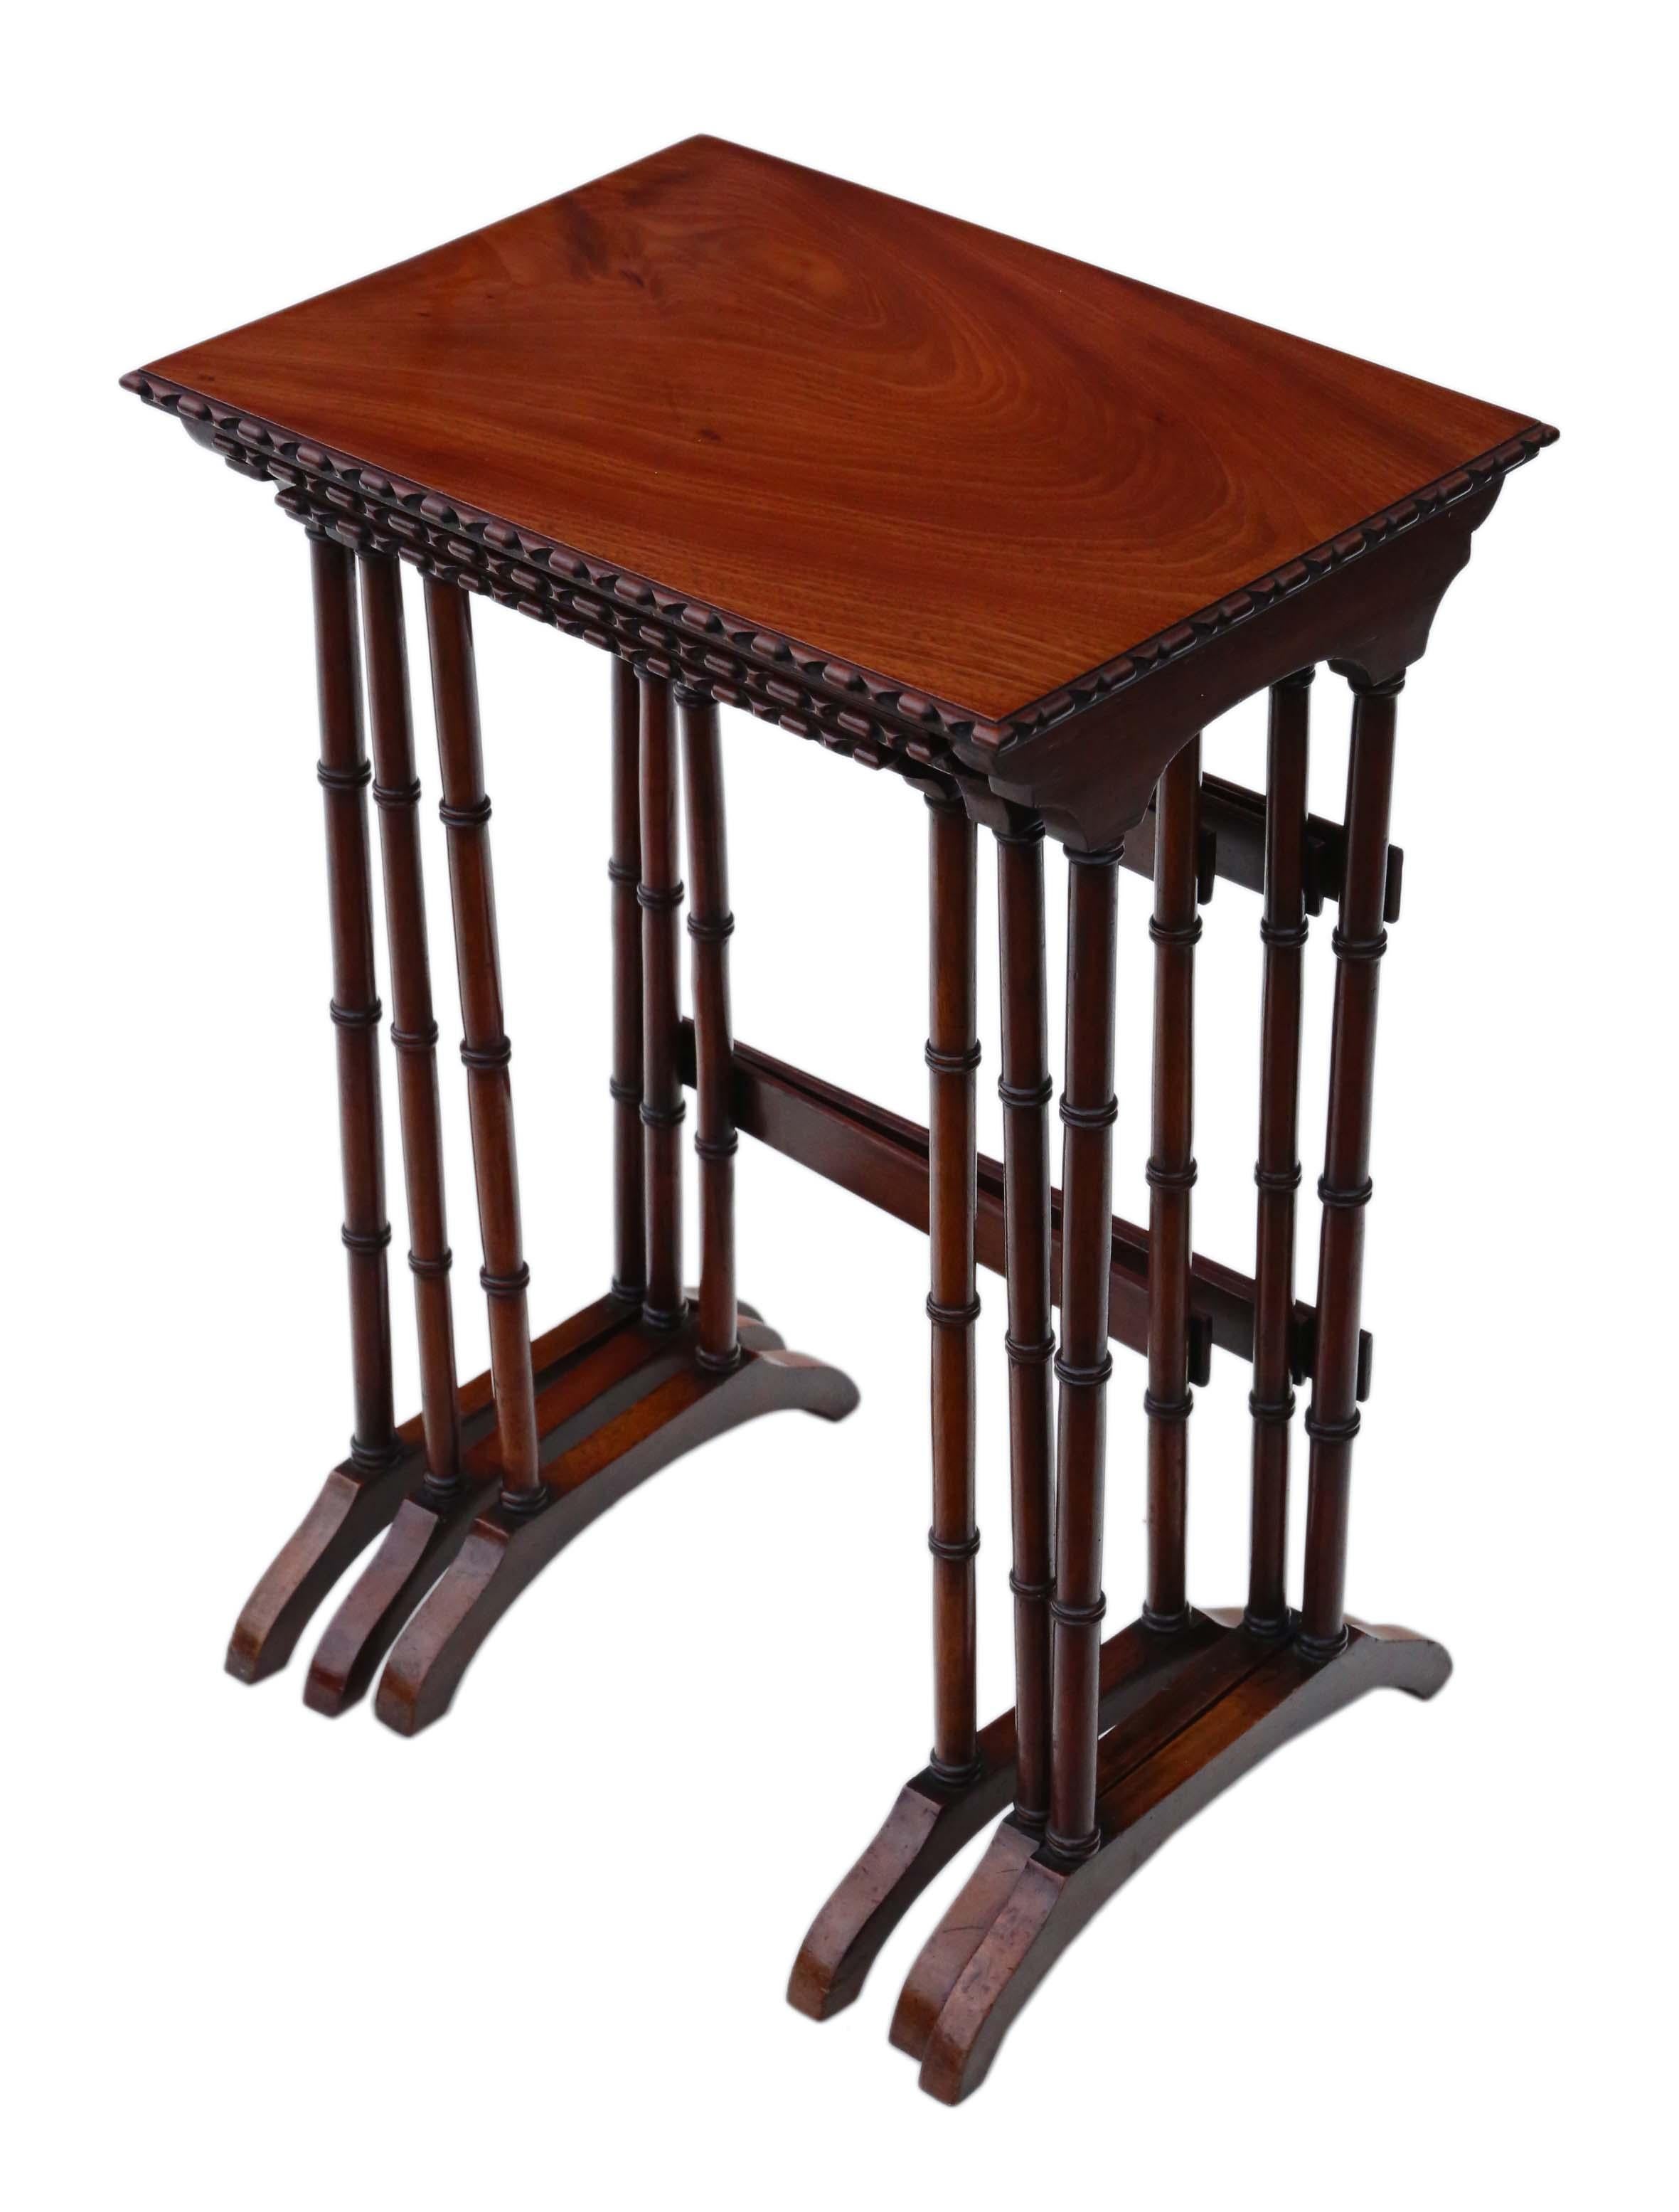 Antique fine quality Victorian mahogany nest of 3 tables, C1900.
 
Very attractive, with lovely proportions and styling. Recently restored to a good standard.
 
No loose joints or woodworm.
Good age, color and patina.

Overall maximum